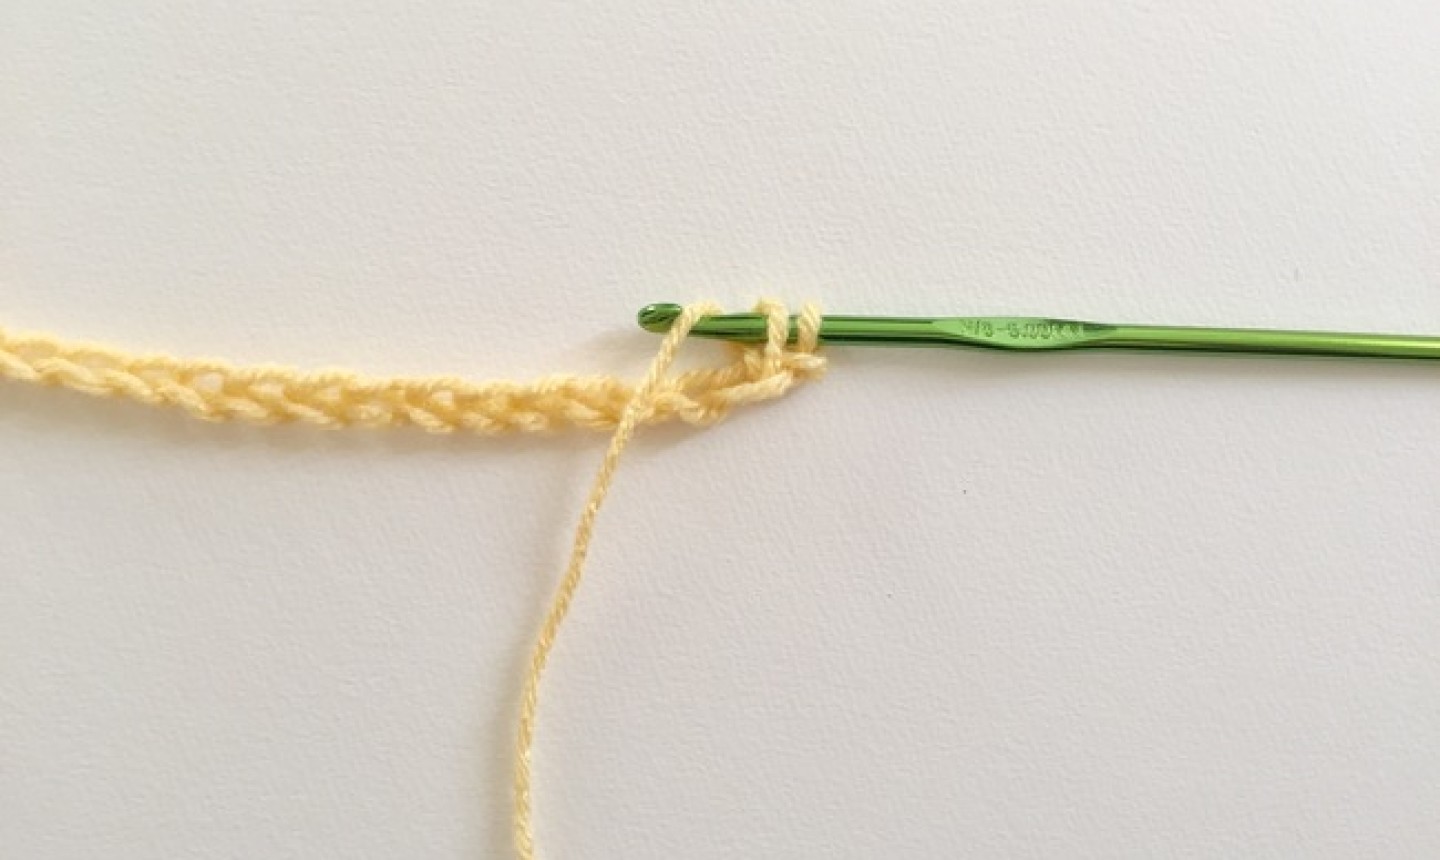 Chain of yellow yarn with green hook